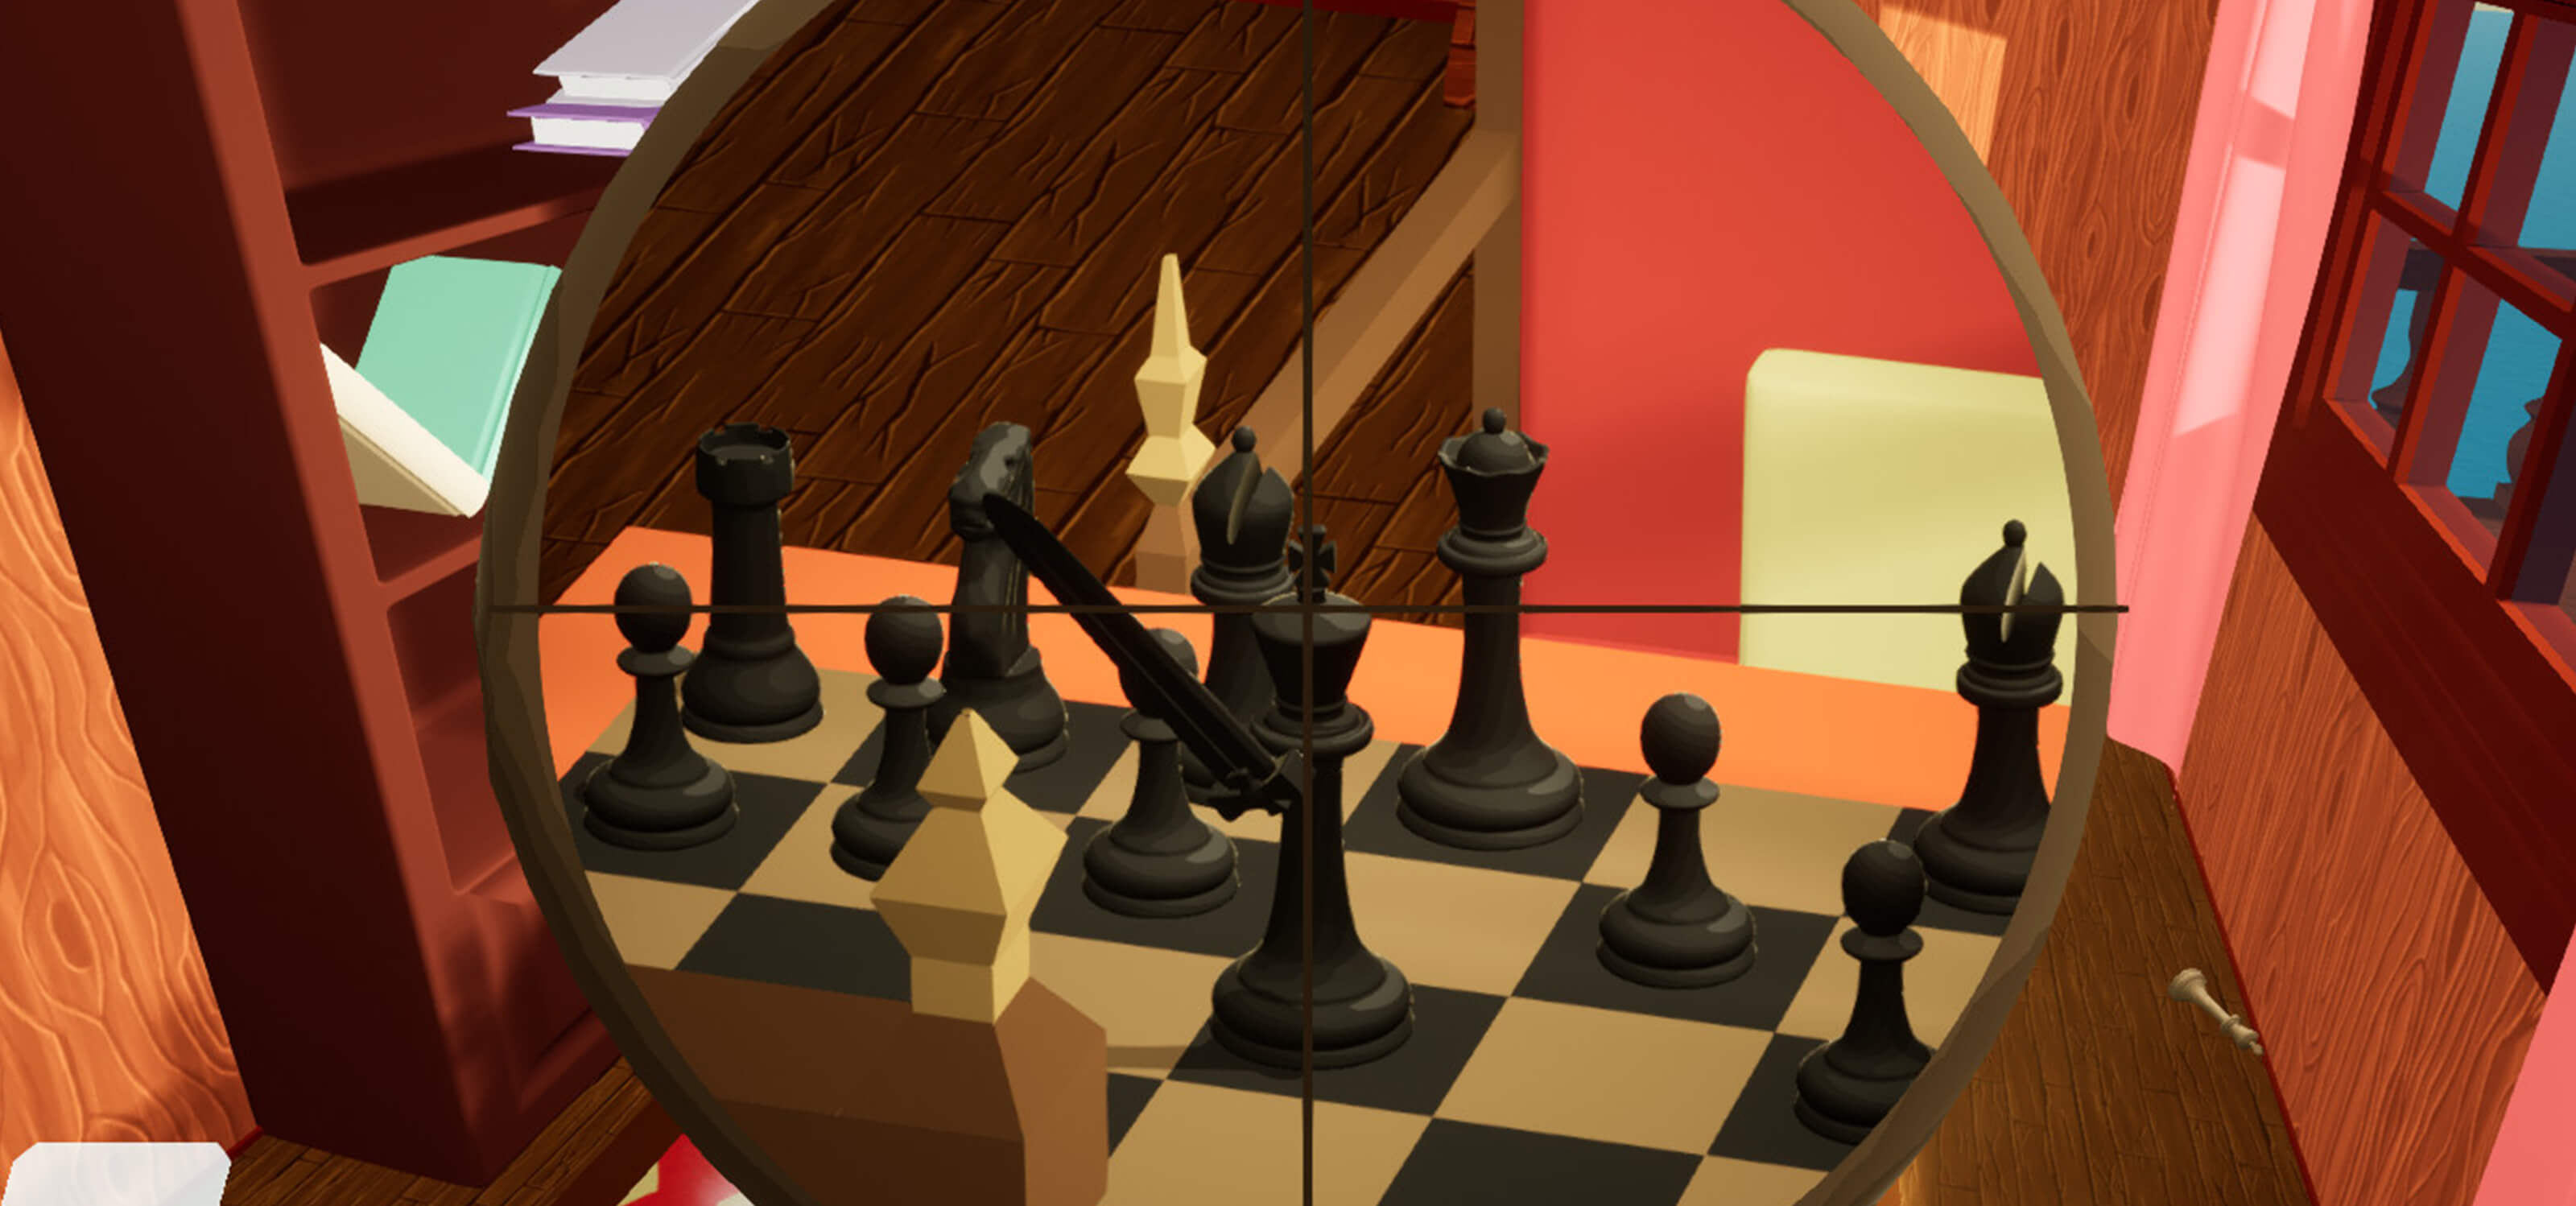 A rook looks at a king down the barrel of its sniper rifle in FPS Chess.